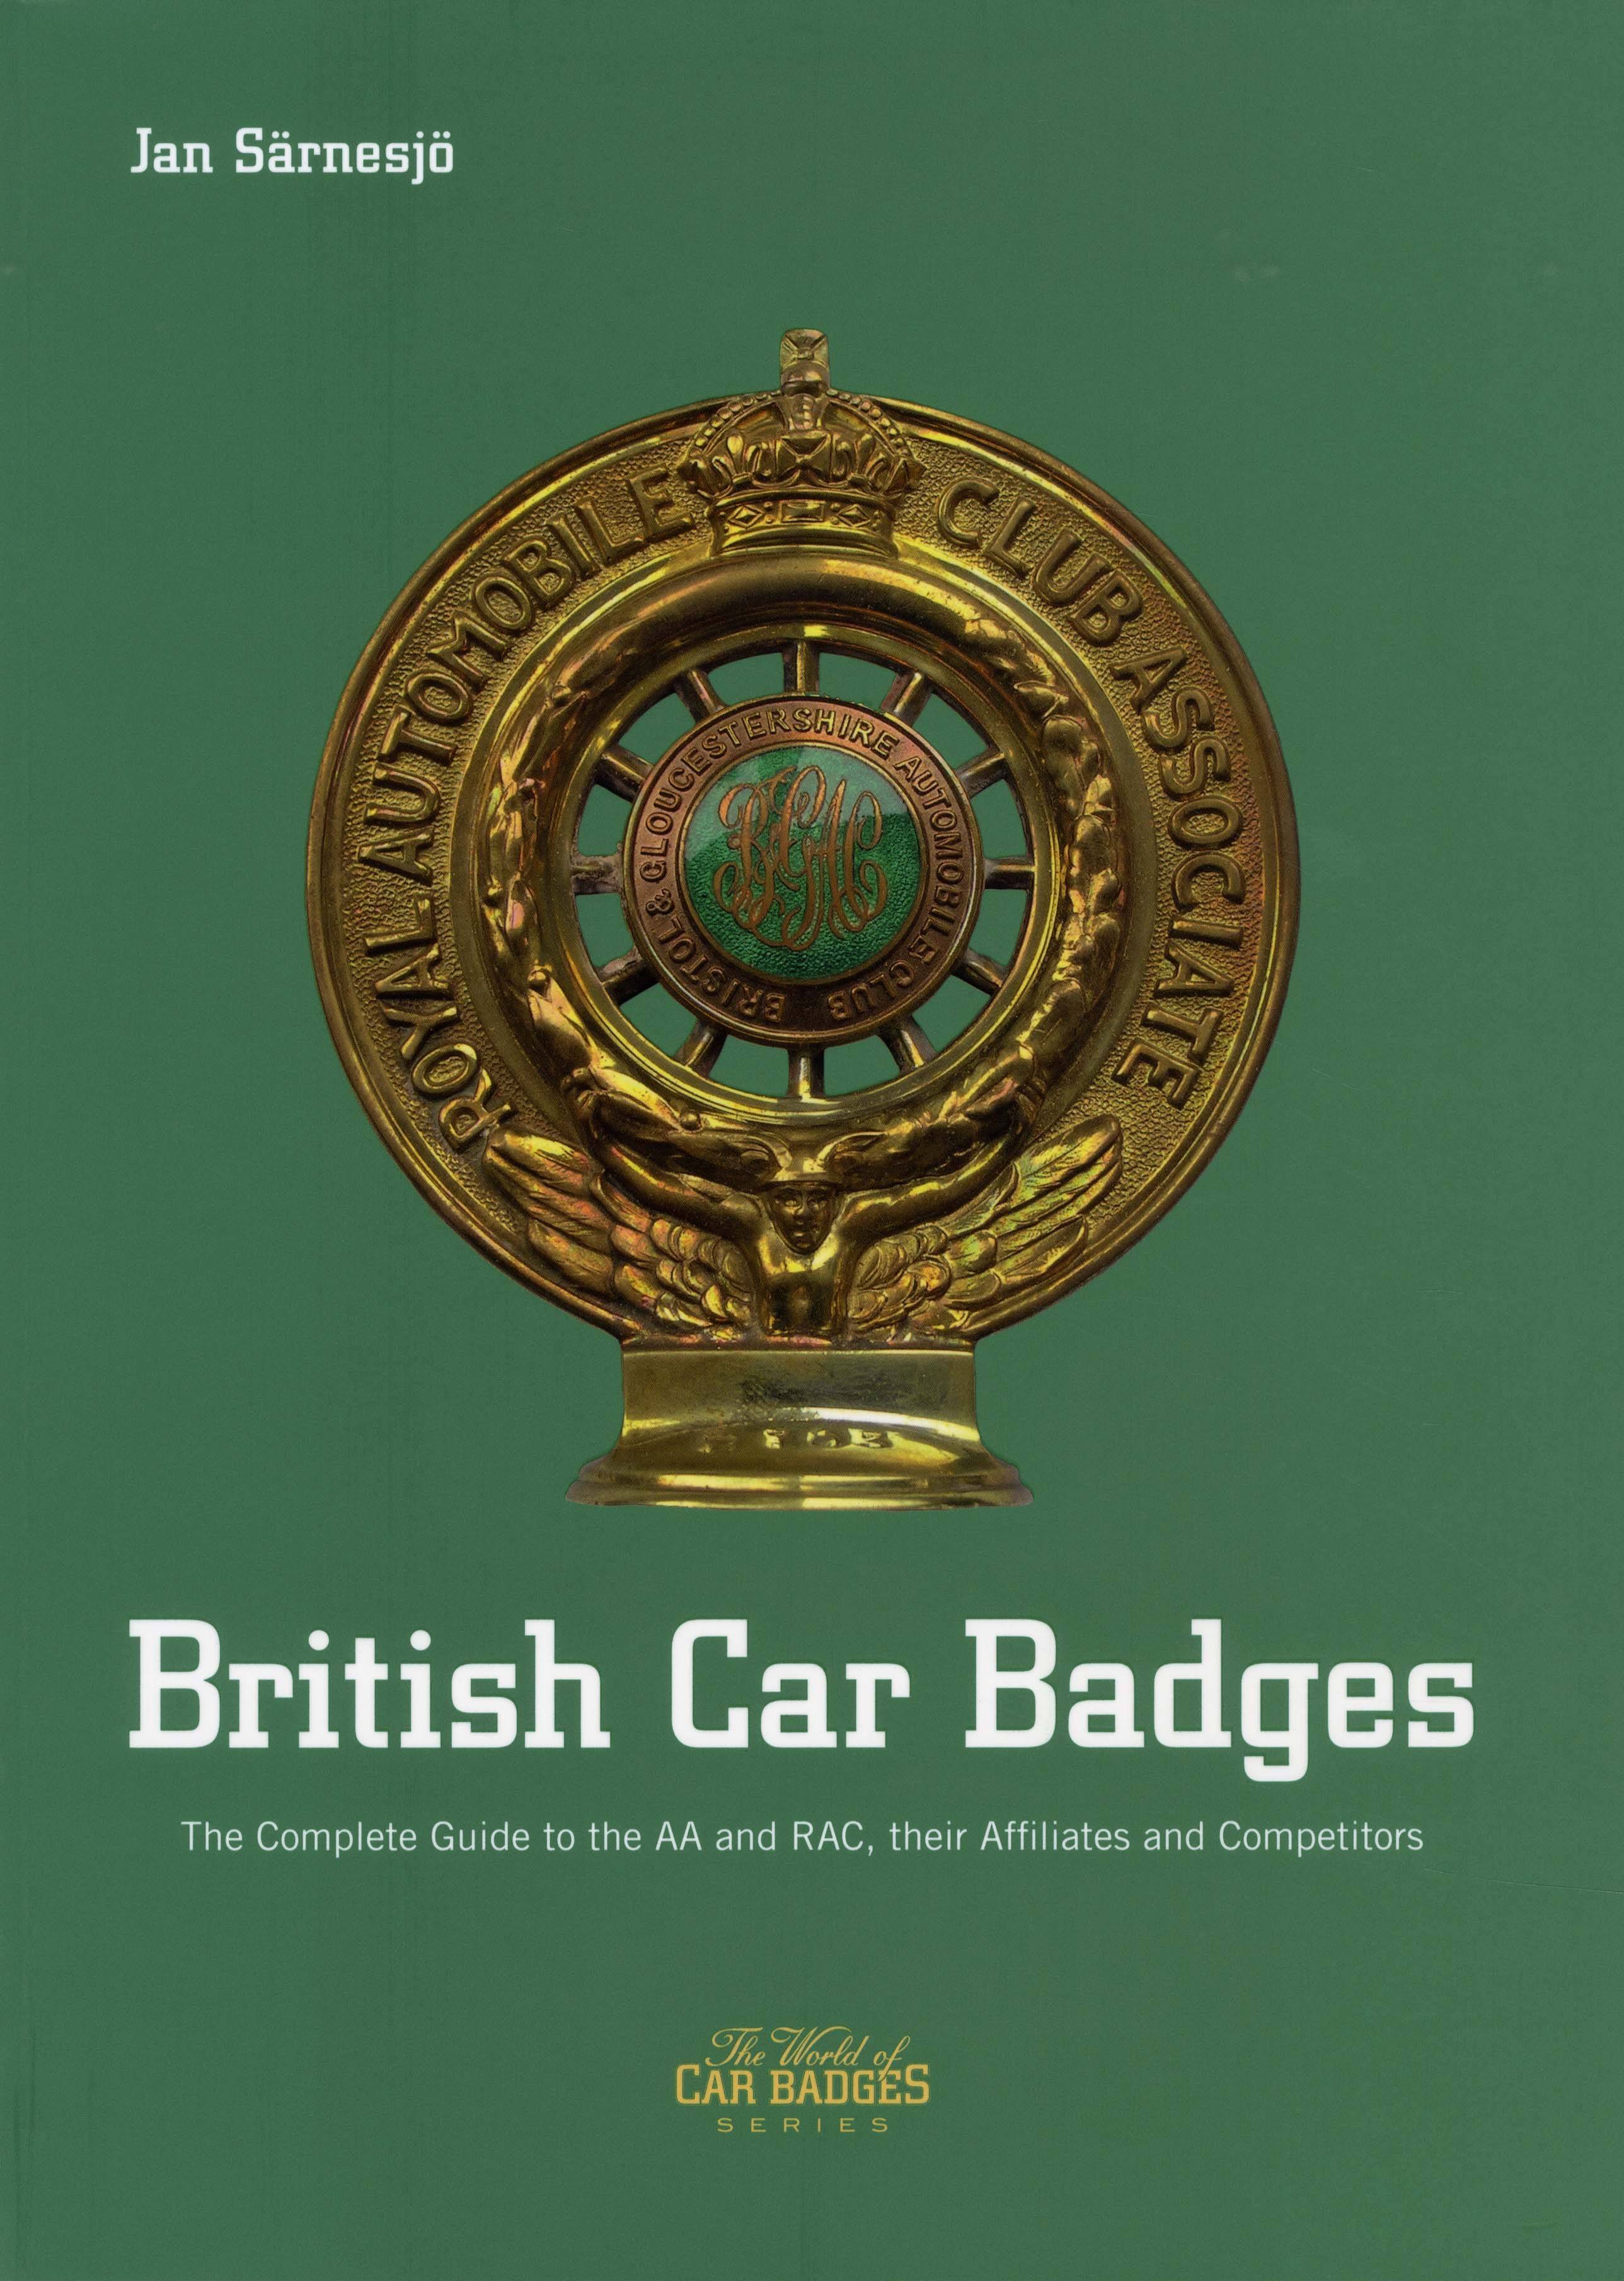 British Car badges : The Complete Guide to the AA and RAC, their Affiliates and Cometitors